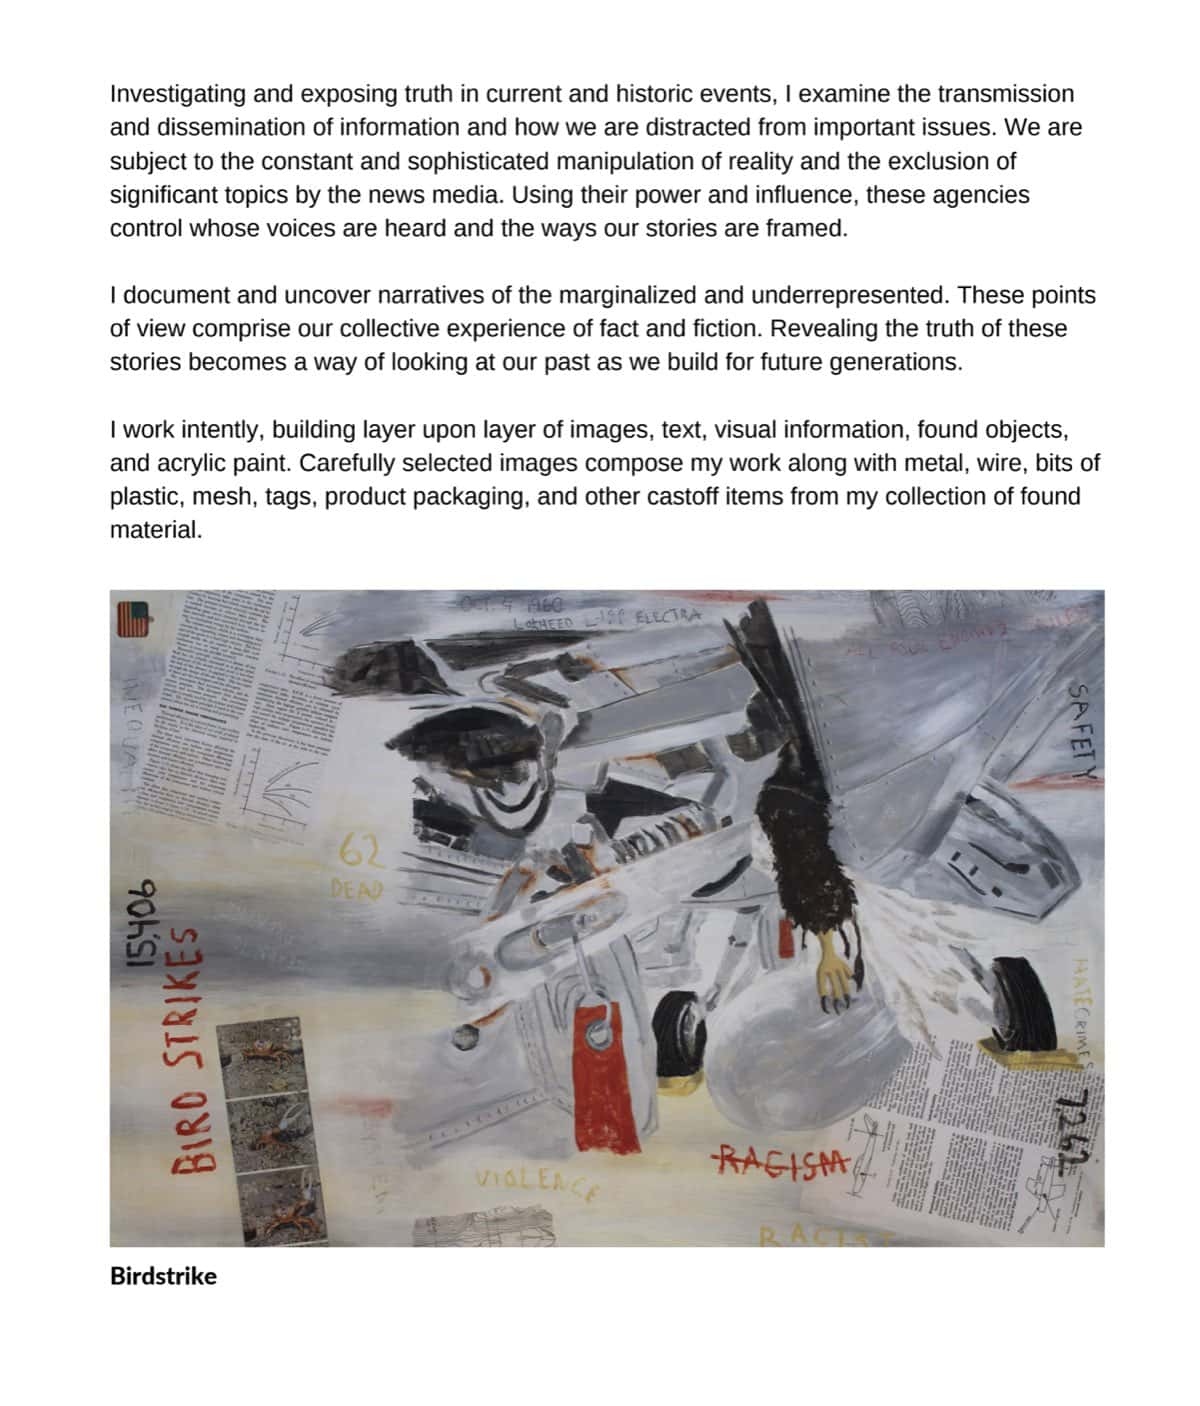 Page from Photosynthesis Magazine featuring Sam Marroquin's collage painting of a birdstrike on an airplane.